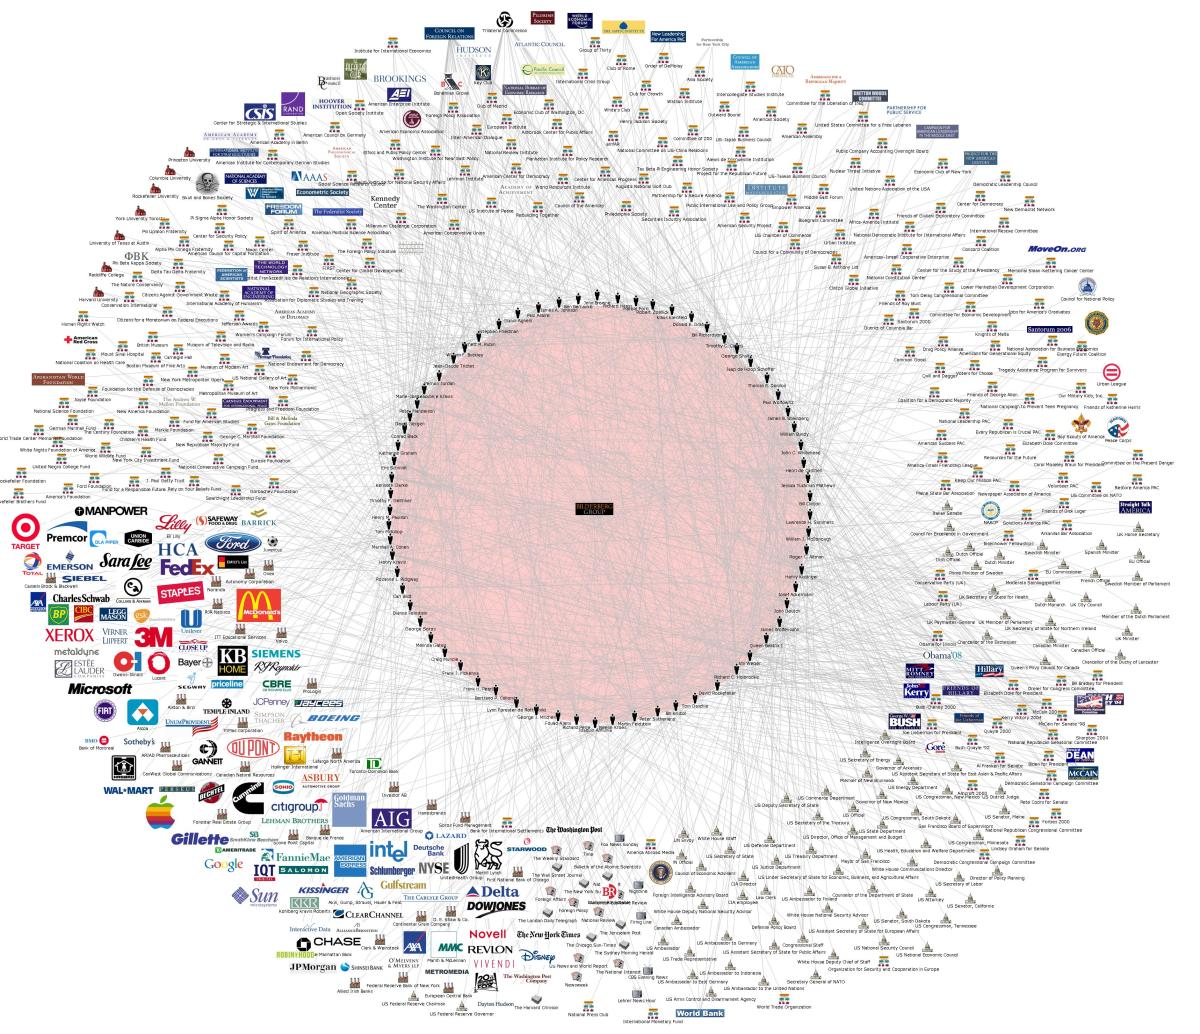 The Bilderberg Group which controls nearly everything as is shown on this image, and some of its tentacles and reach can be seen in this high resolution picture, when clicked to see the intricate inter/inter-connecteness and and depth...